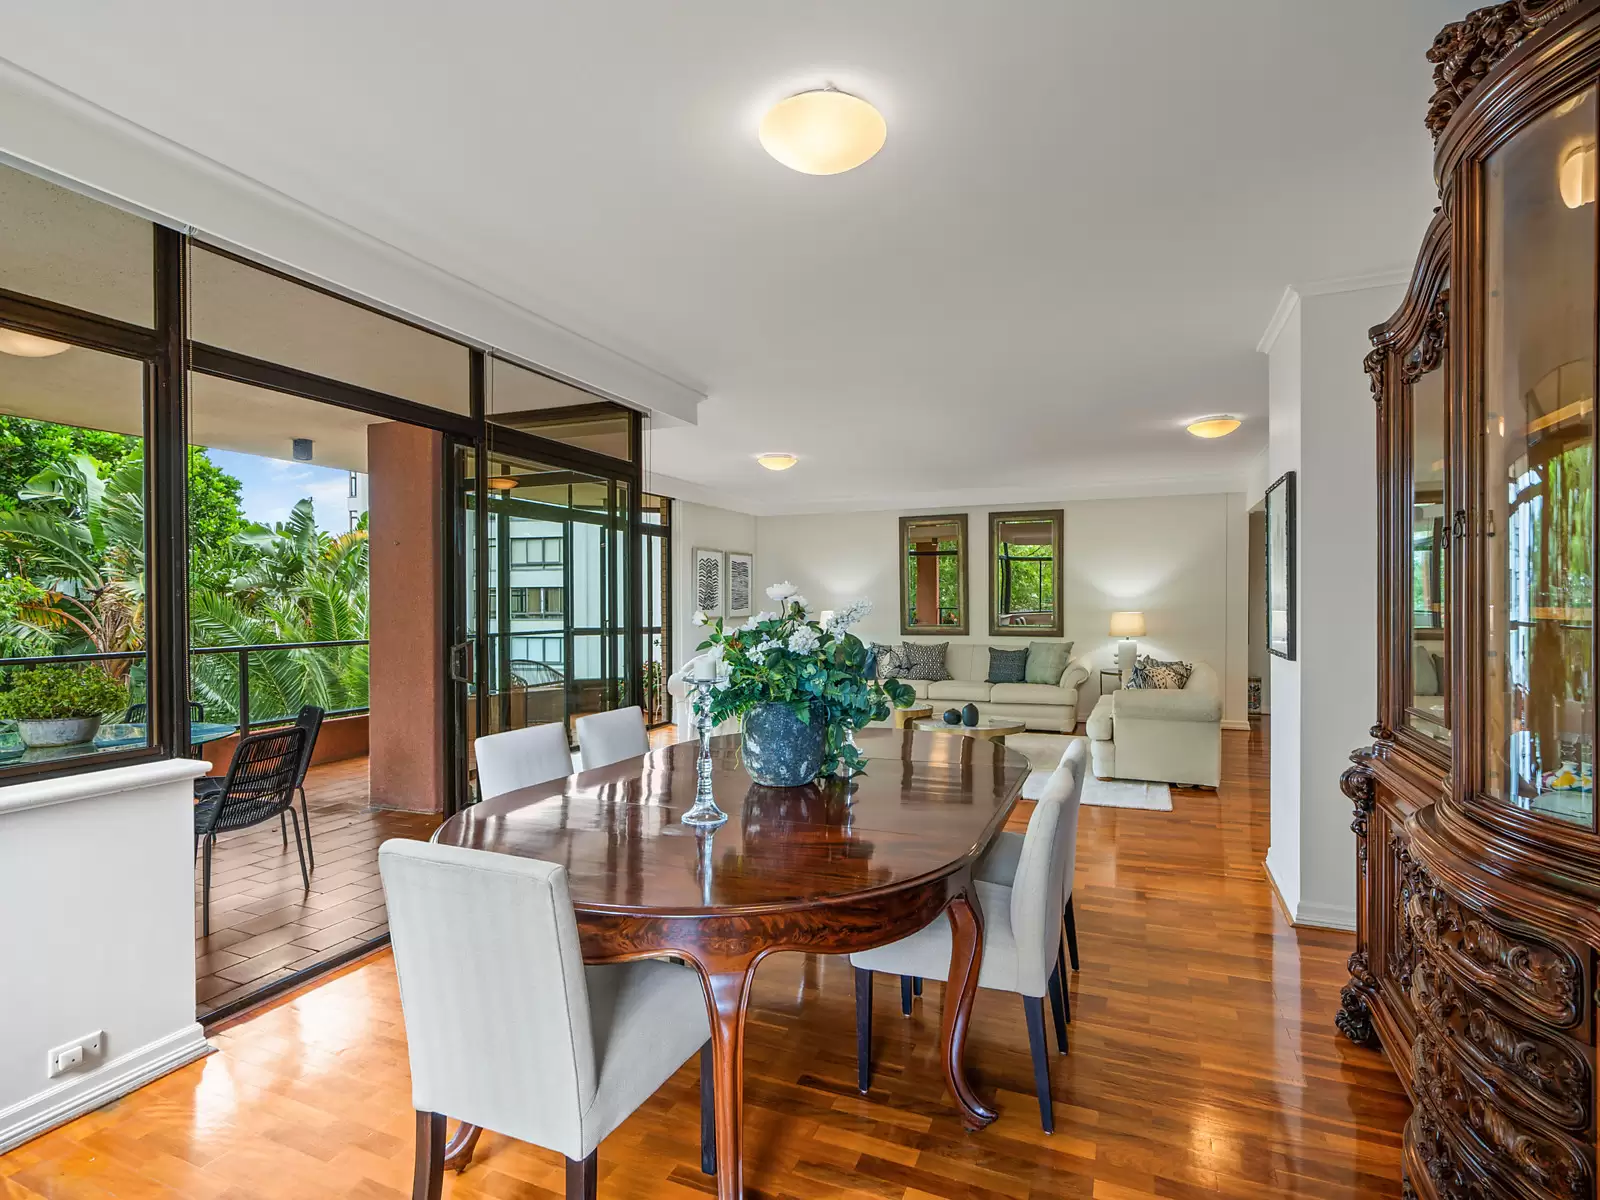 Photo #5: 3A/81 Darling Point Road, Darling Point - Auction by Sydney Sotheby's International Realty